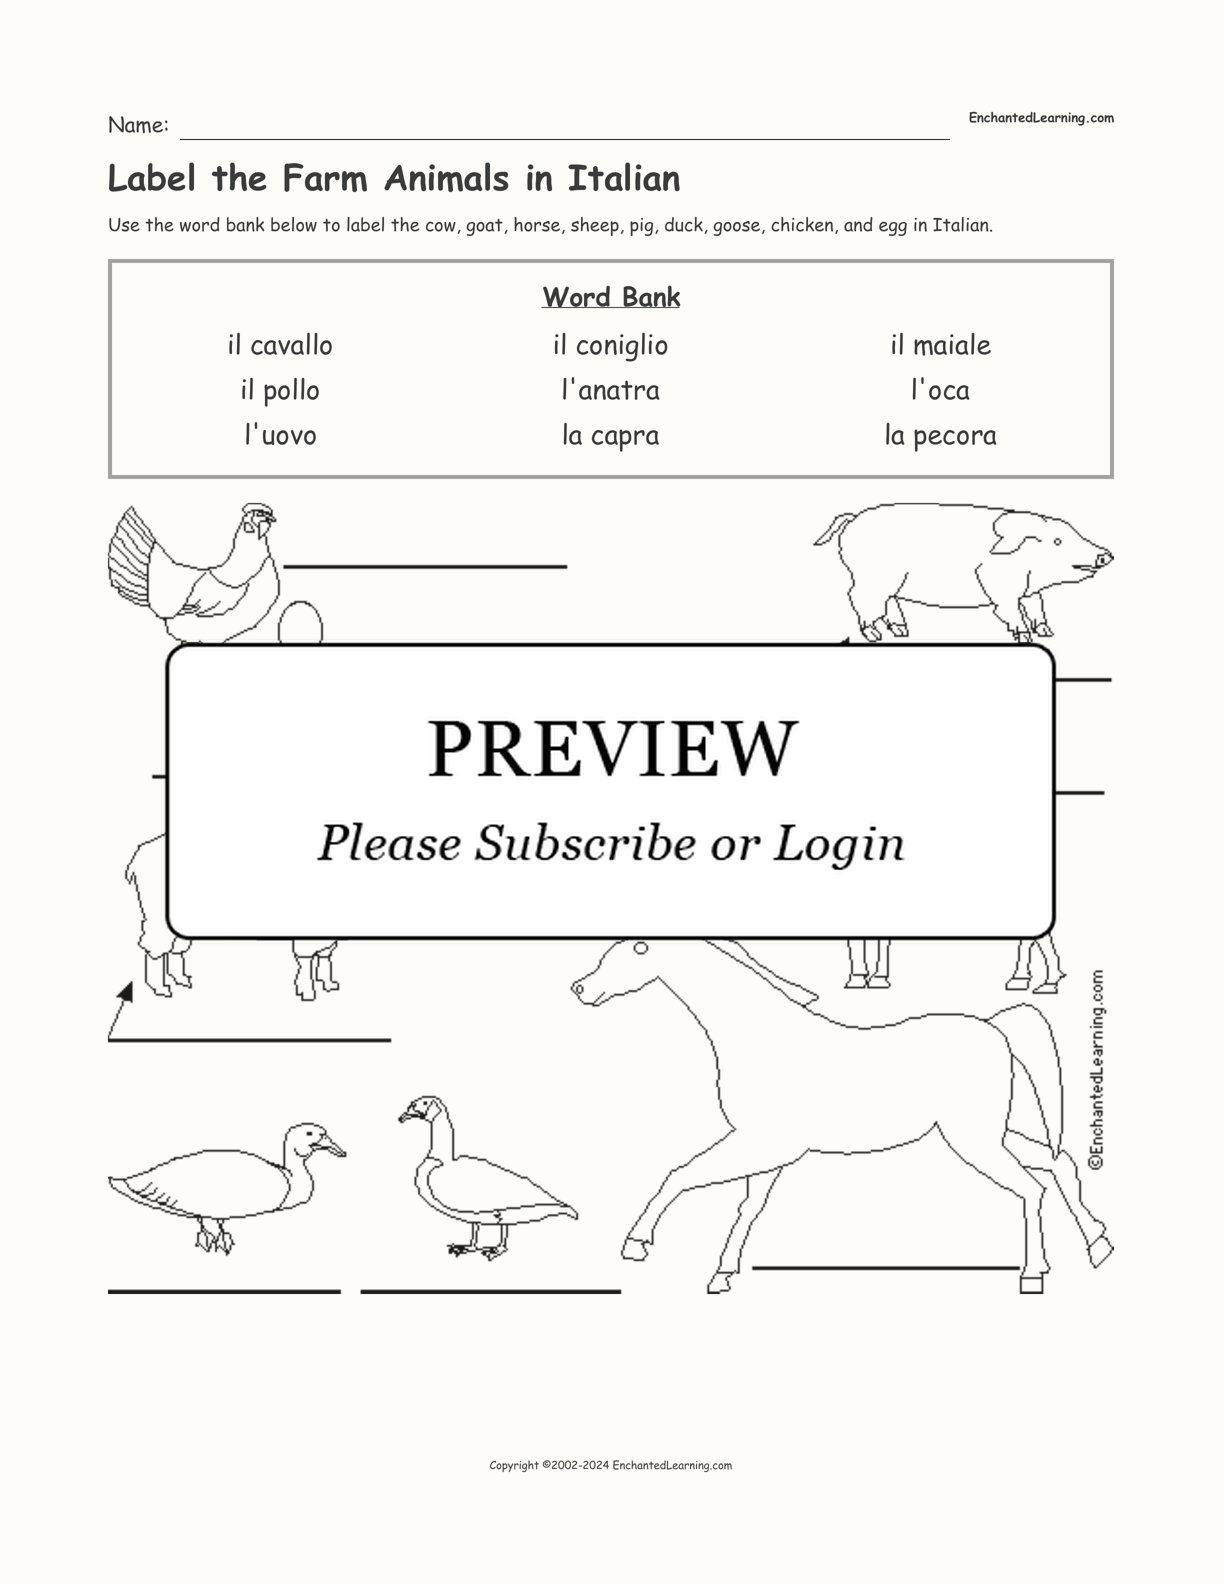 Label the Farm Animals in Italian interactive worksheet page 1